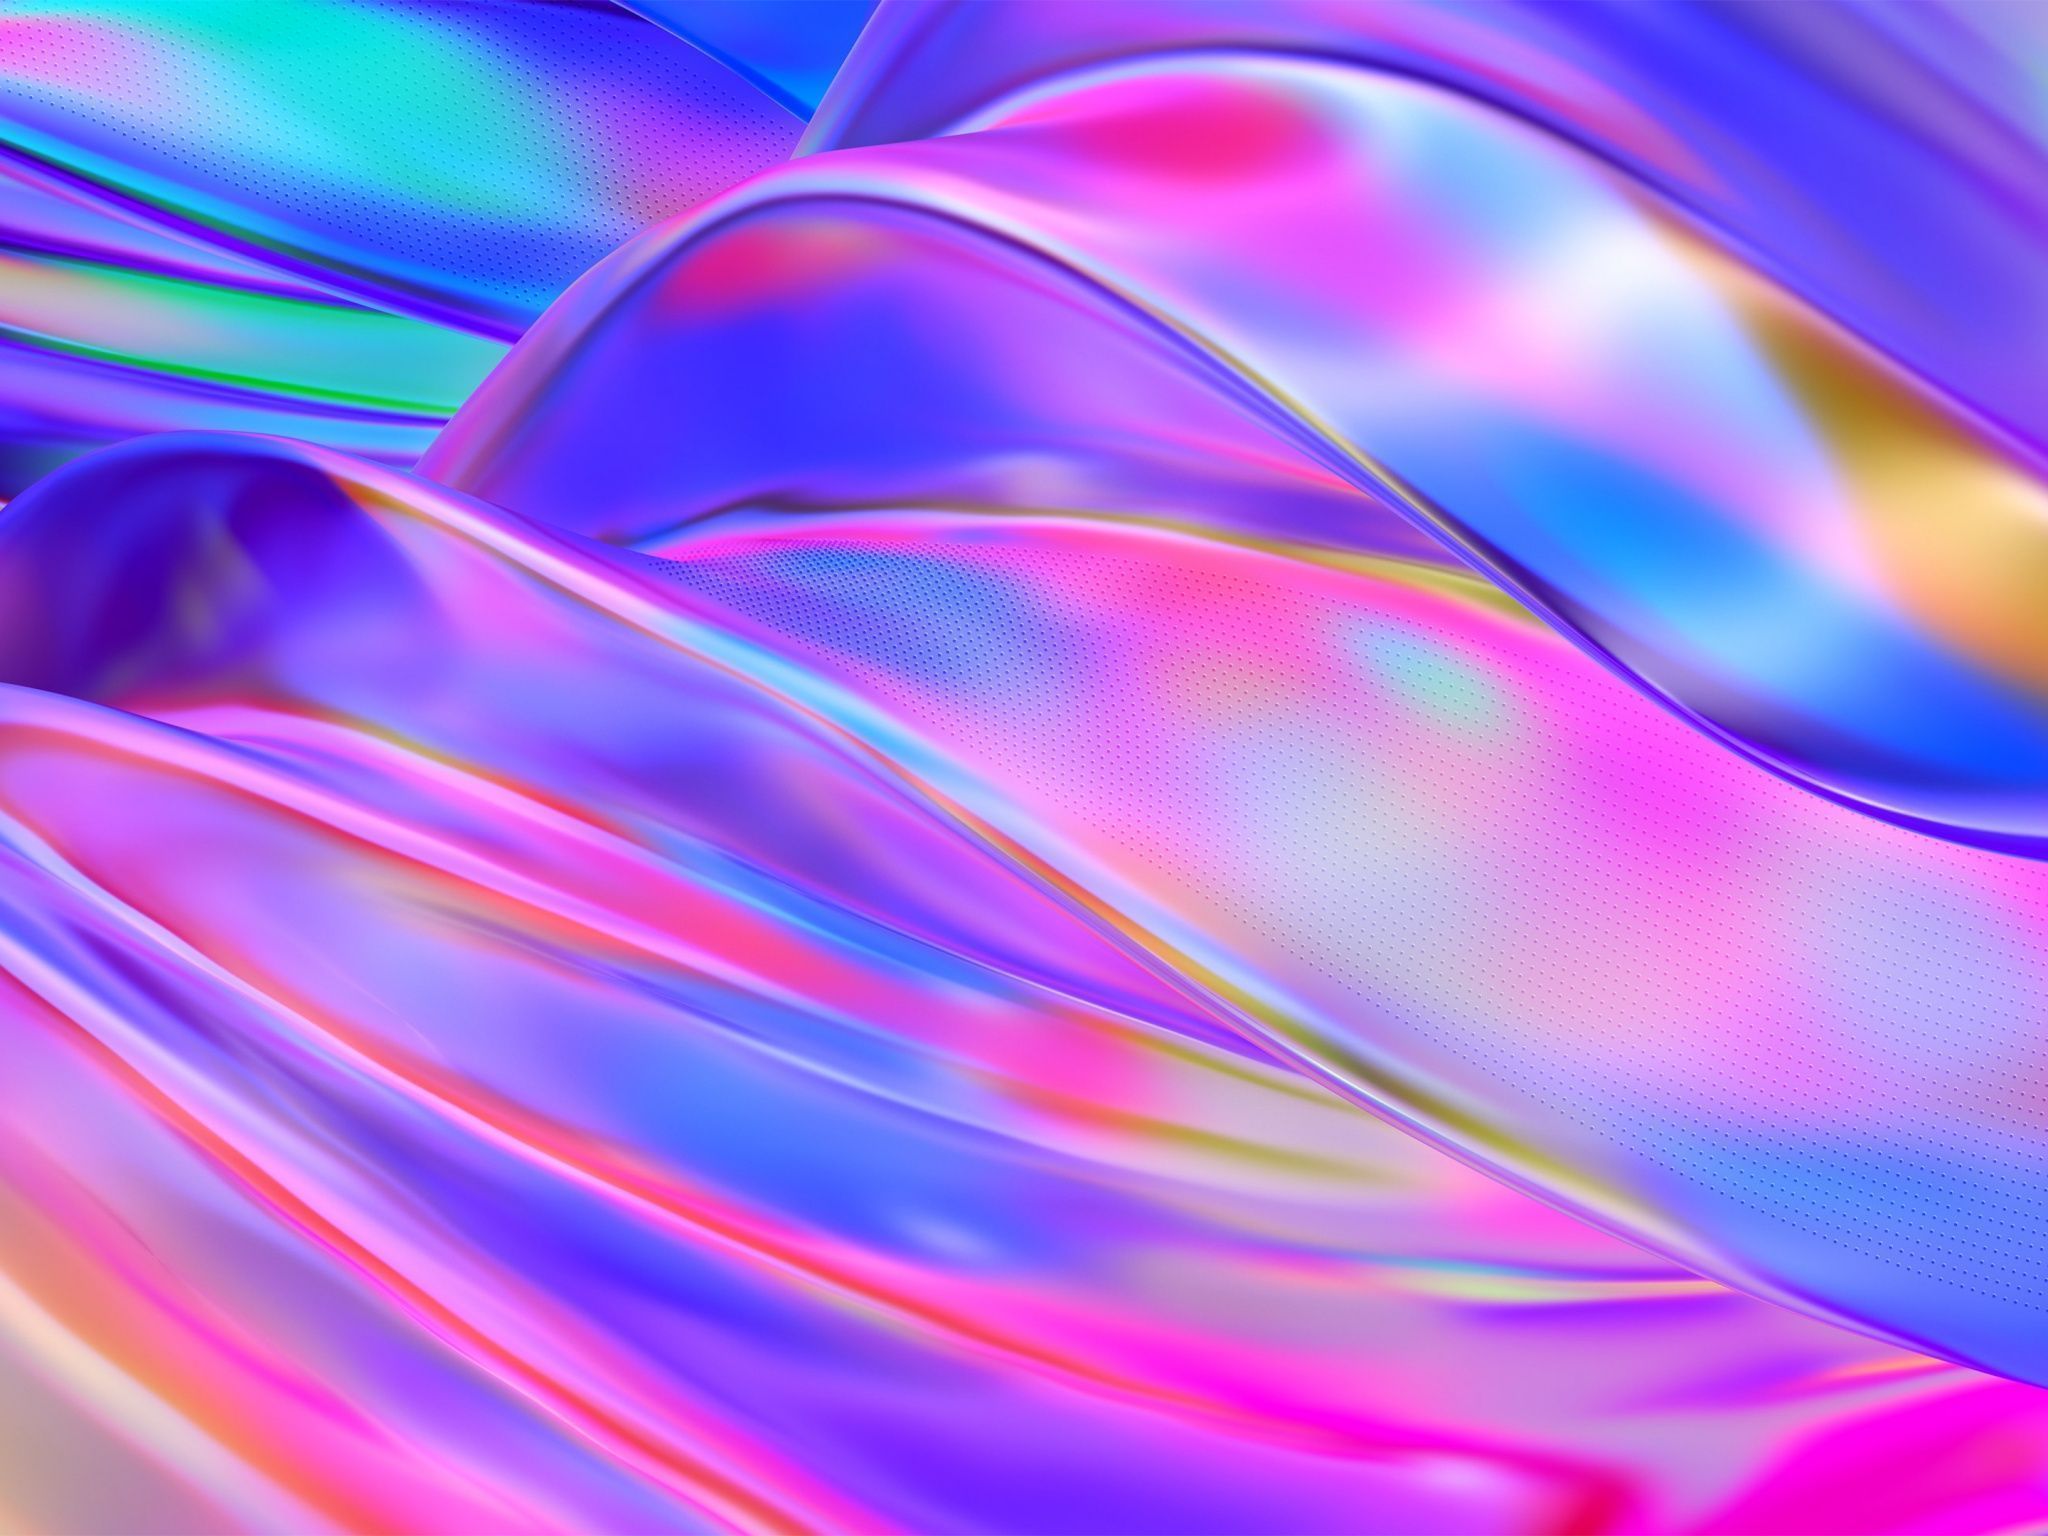 A colorful abstract background with flowing rainbow colors. - Silk, iridescent